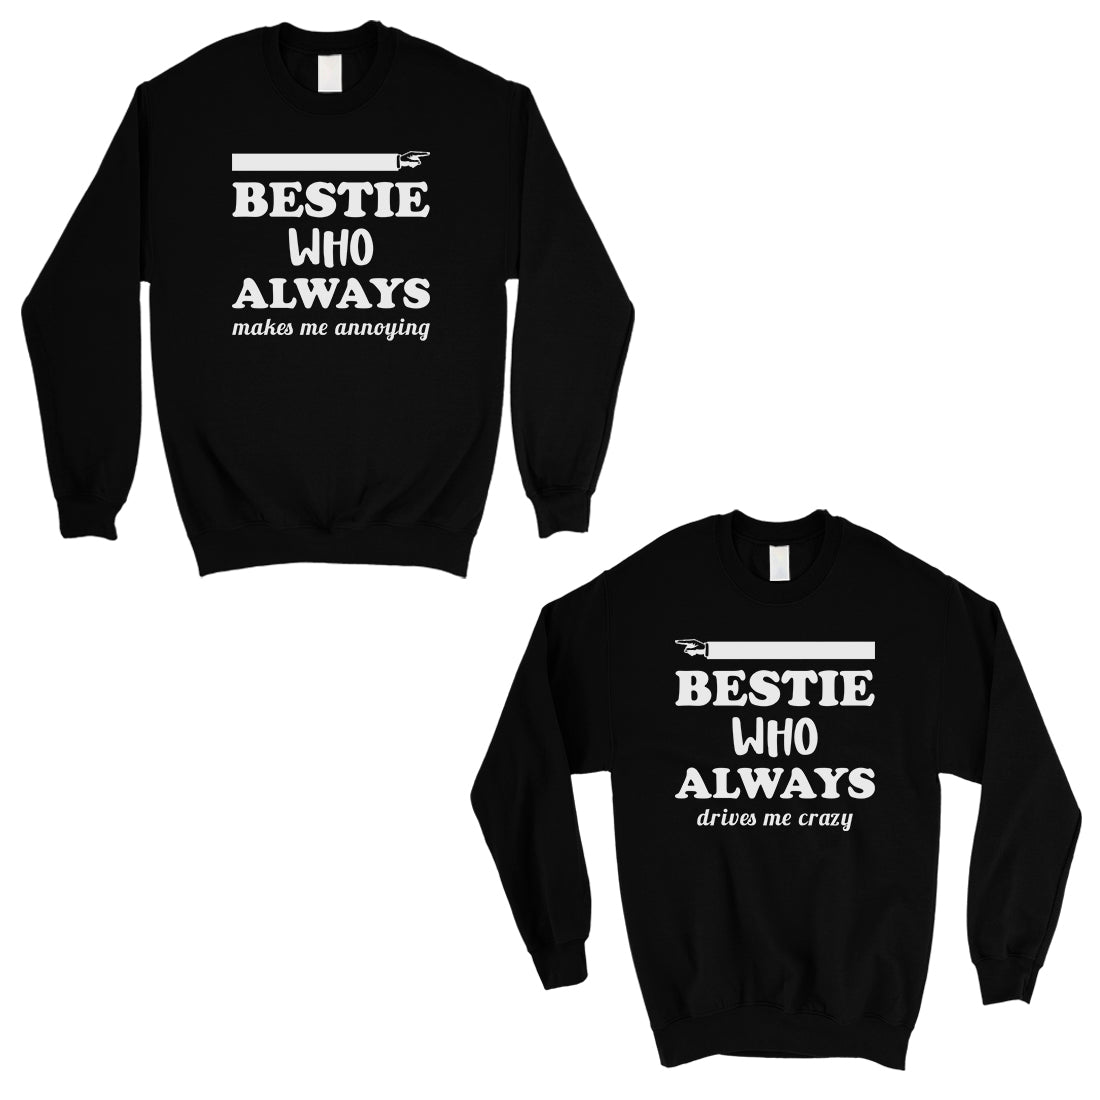 You Are My Person Cute Best Friend Sweatshirts Matching Gift Ideas -  Walmart.com